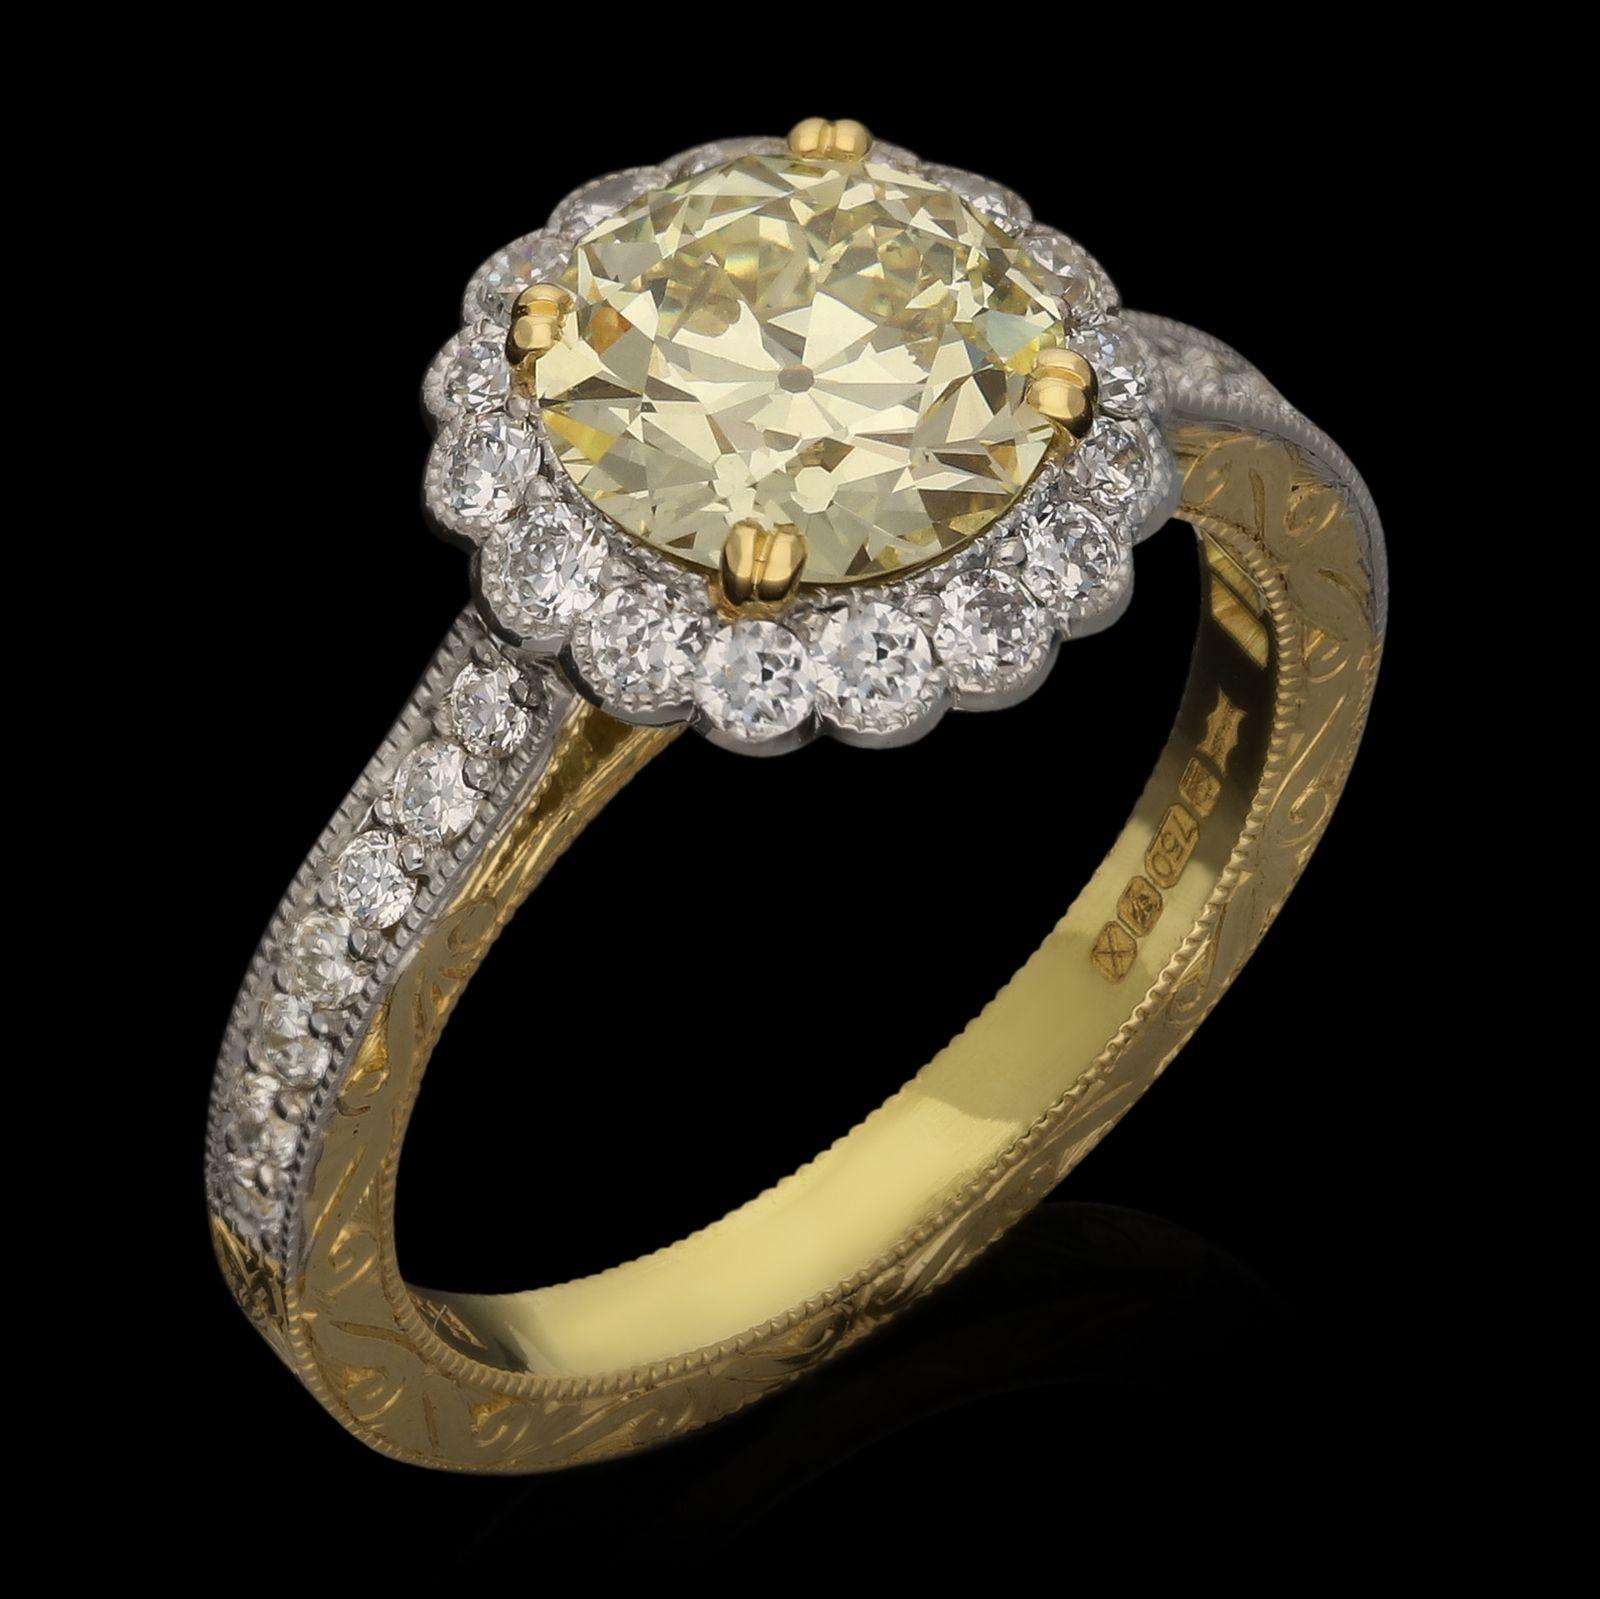 A beautiful old cut diamond cluster ring by Hancocks, centred with a bright and lively pale yellow old European brilliant cut diamond weighing 1.62ct and of U-V colour and SI1 clarity, claw set in 18ct gold and surrounded by a fine frame of old